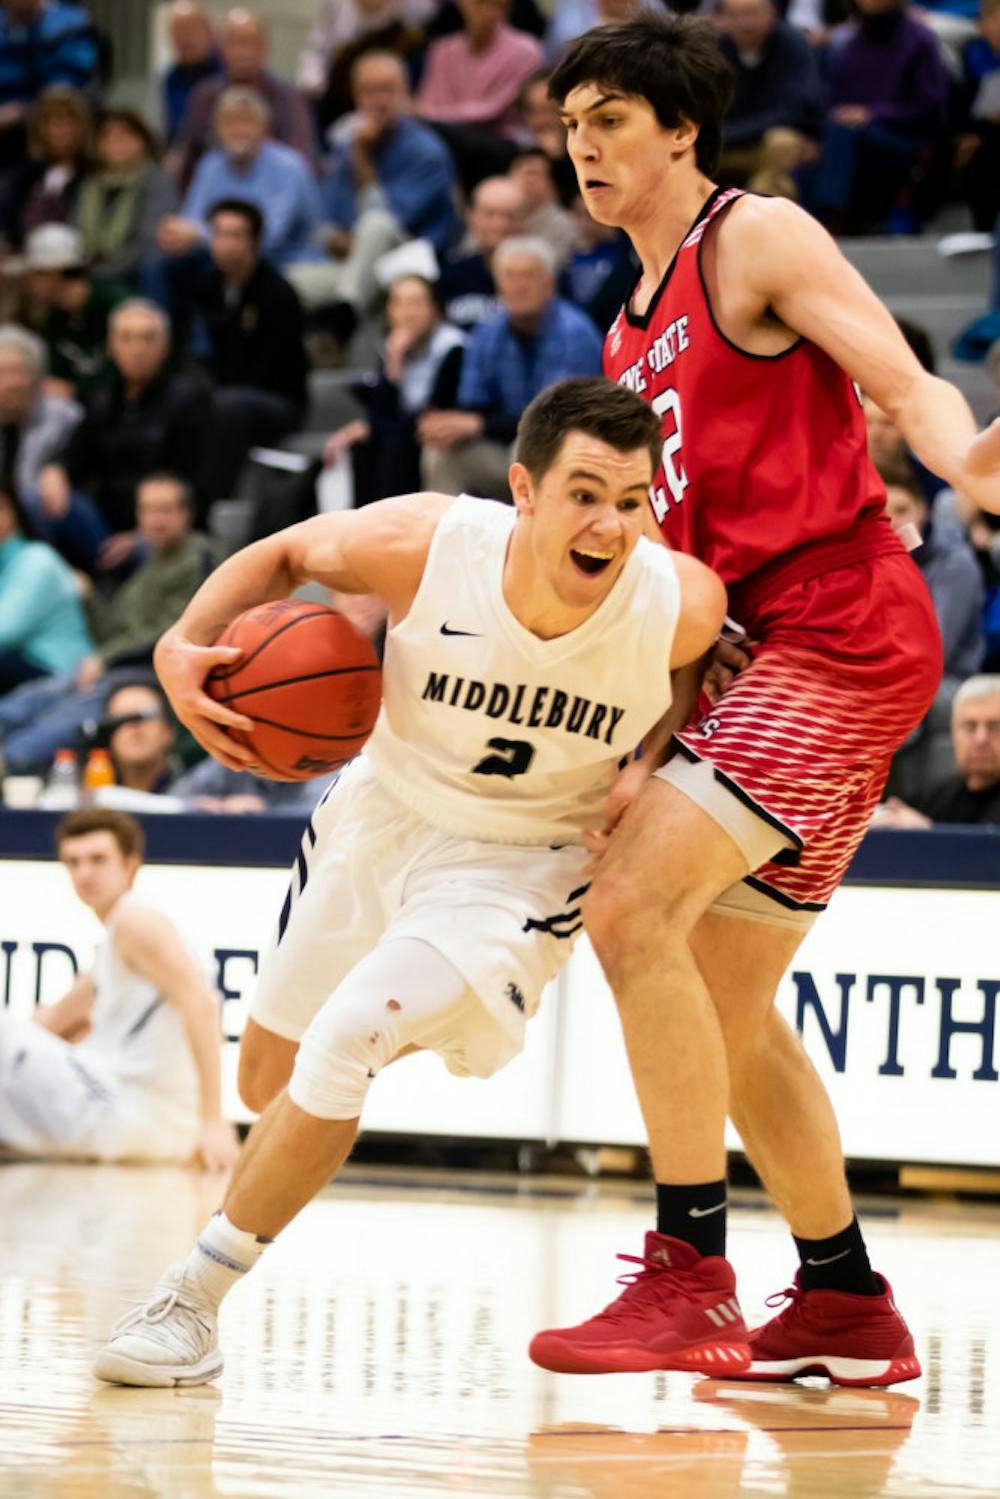 <span class="photocreditinline"><a href="https://middleburycampus.com/39670/uncategorized/michael-borenstein/">MICHAEL BORENSTEIN</a></span><br />Griffin Kornaker ’21 attempts to edge his way into the Keene State perimeter.